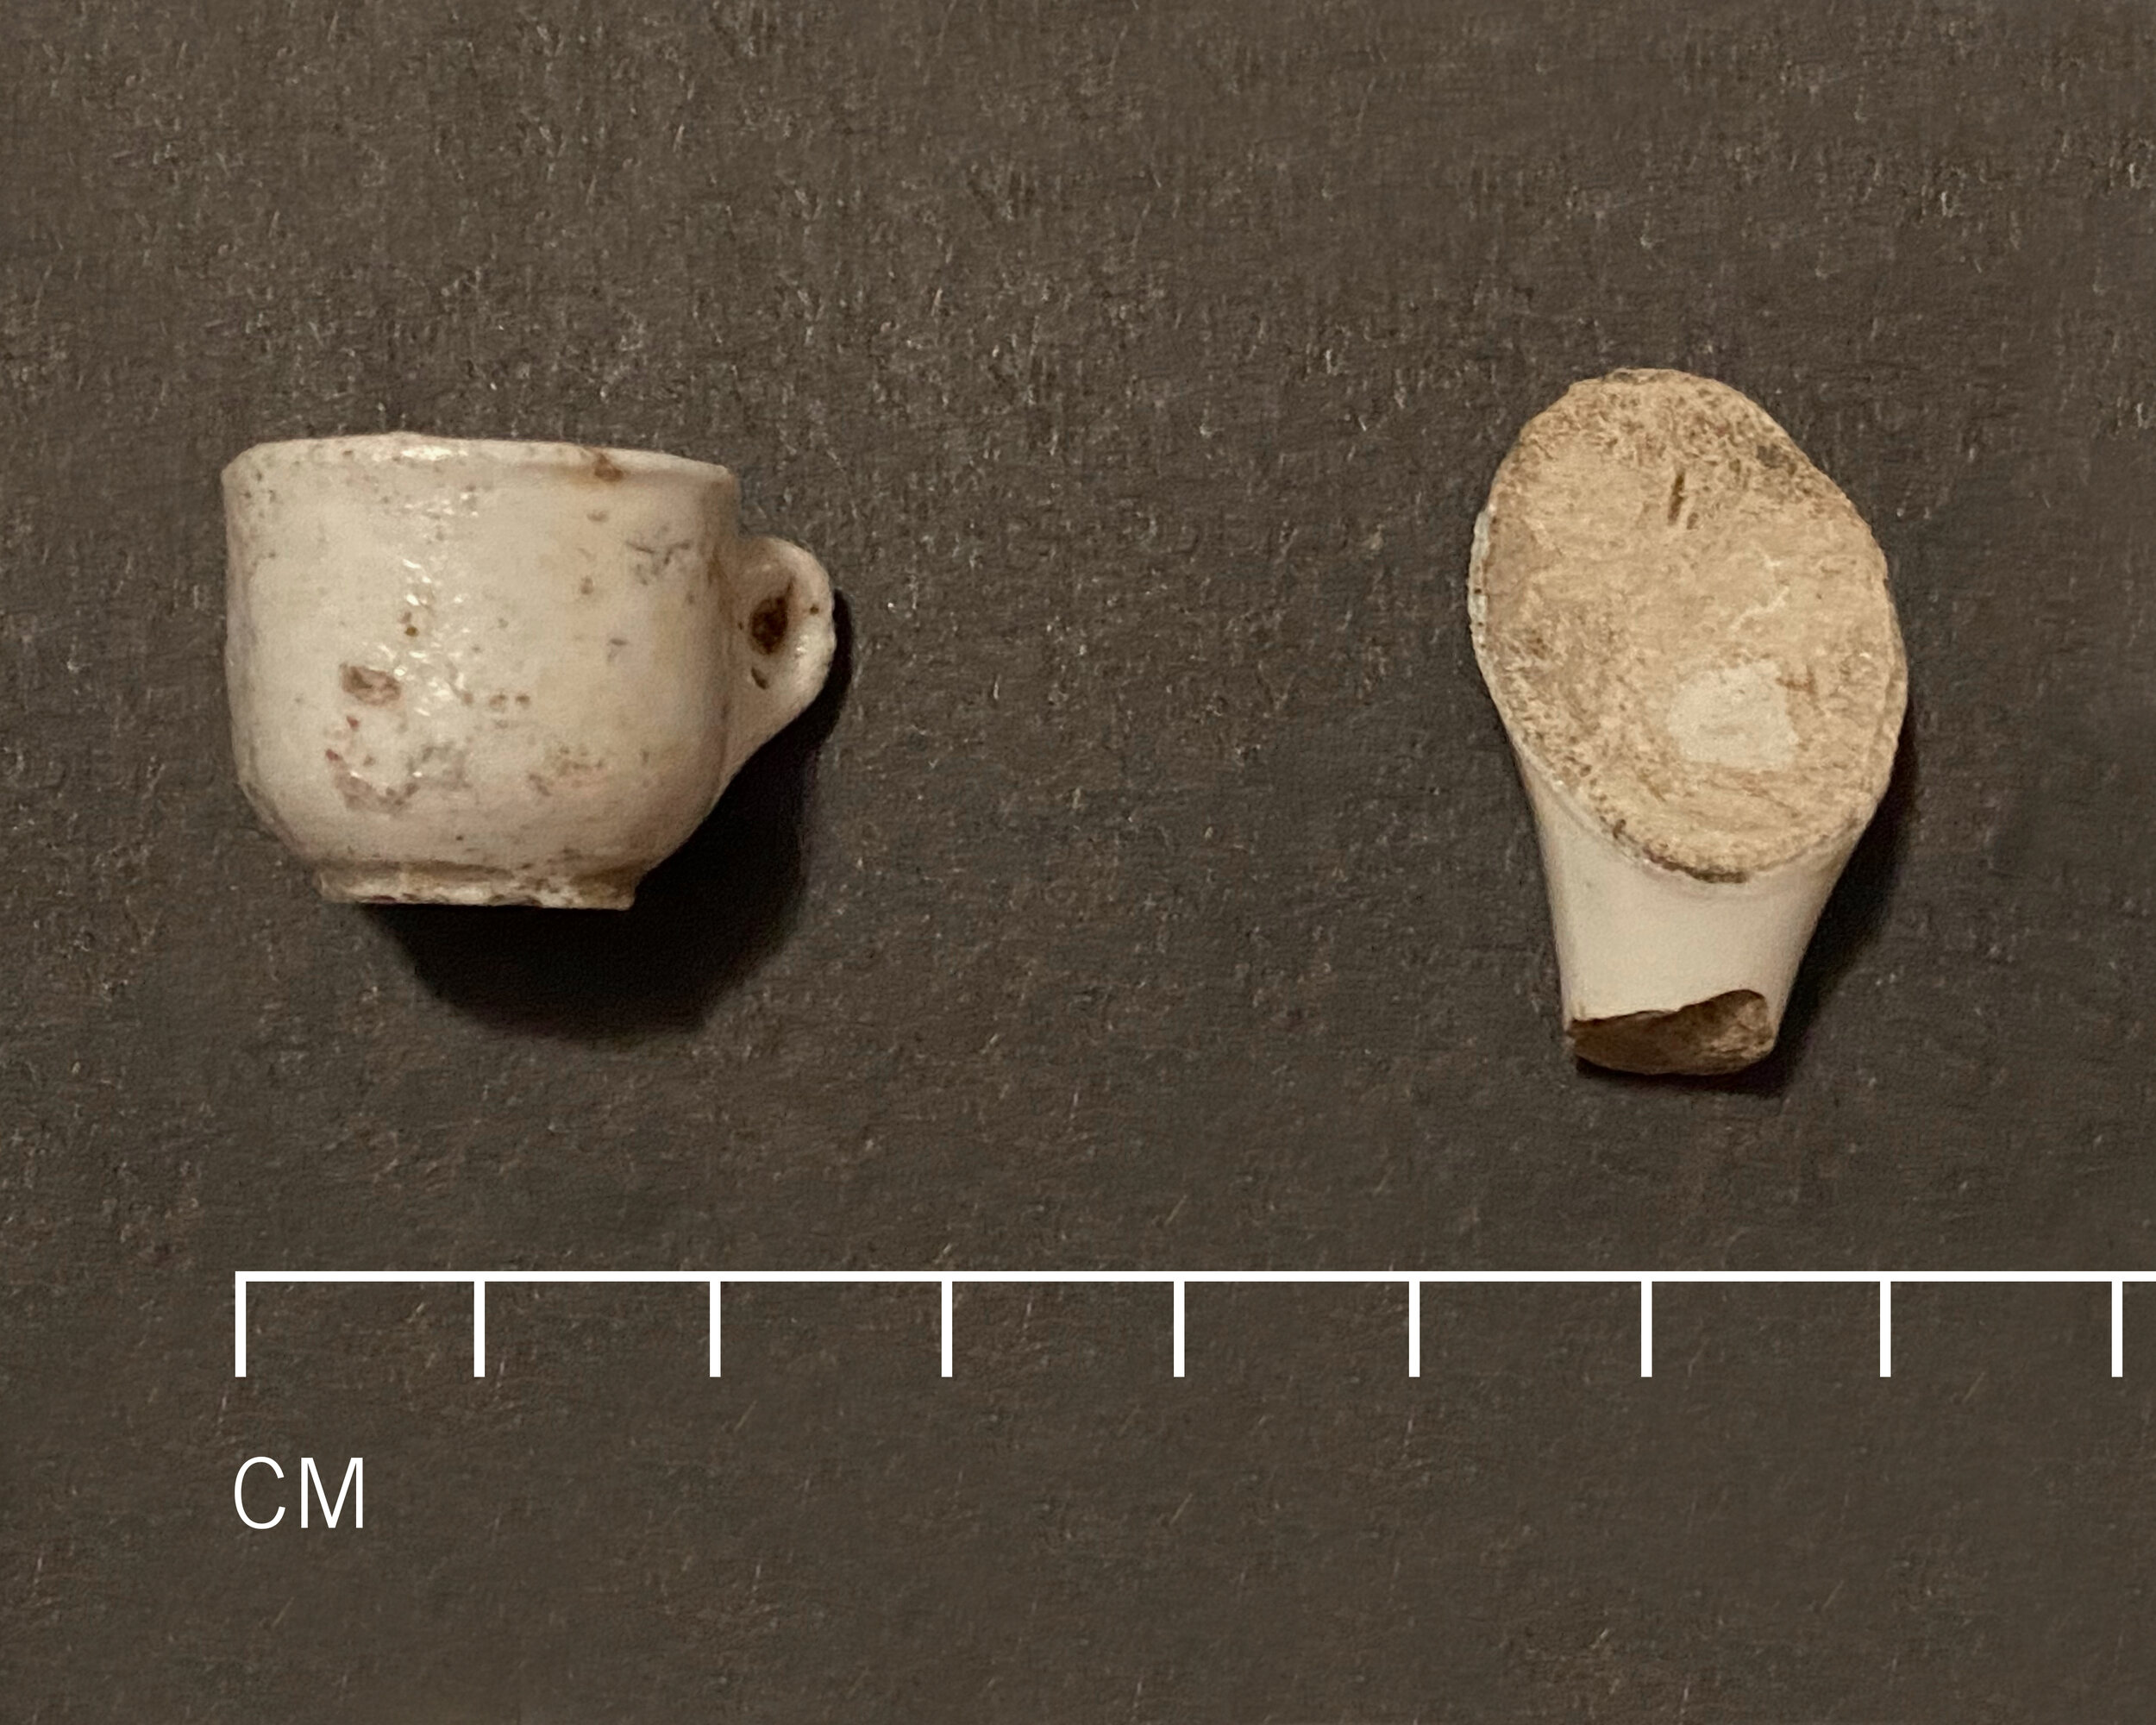   Ceramic toy fragments recovered during archaeological investigations.  Courtesy of Allison McGovern 